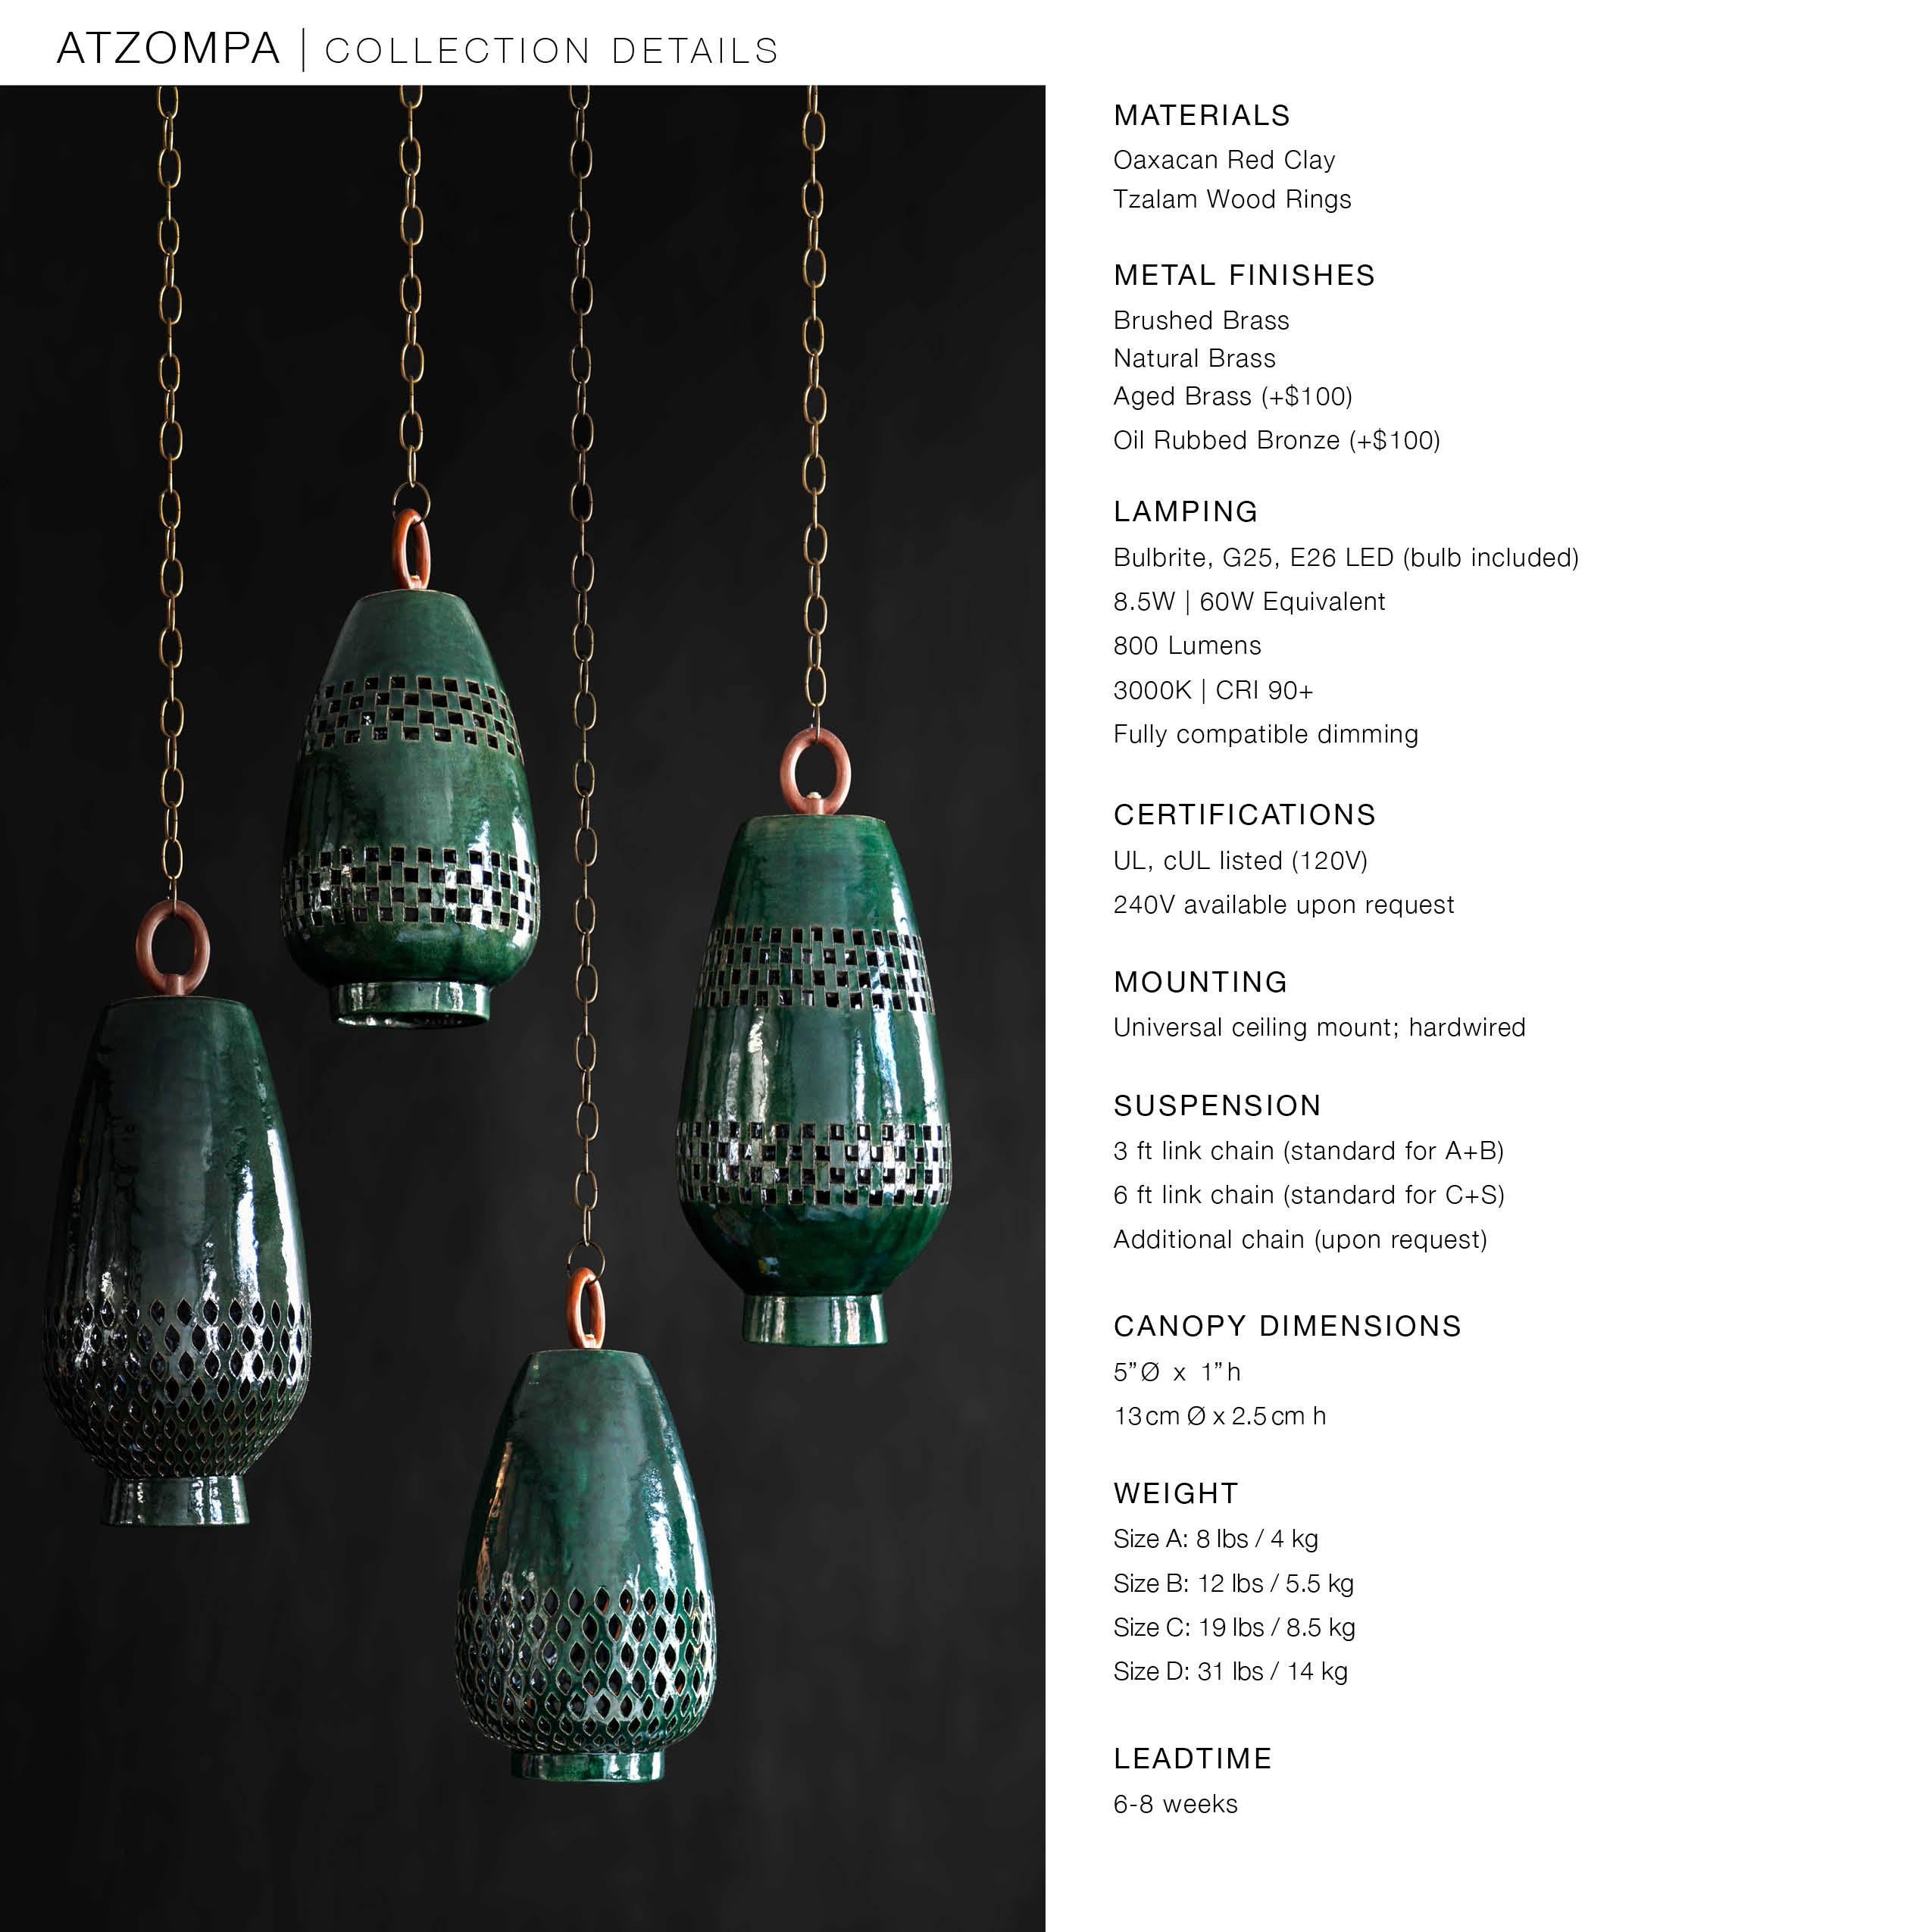 Emerald Ceramic Pendant Light XL, Natural Brass, Ajedrez Atzompa Collection In New Condition For Sale In New York, NY